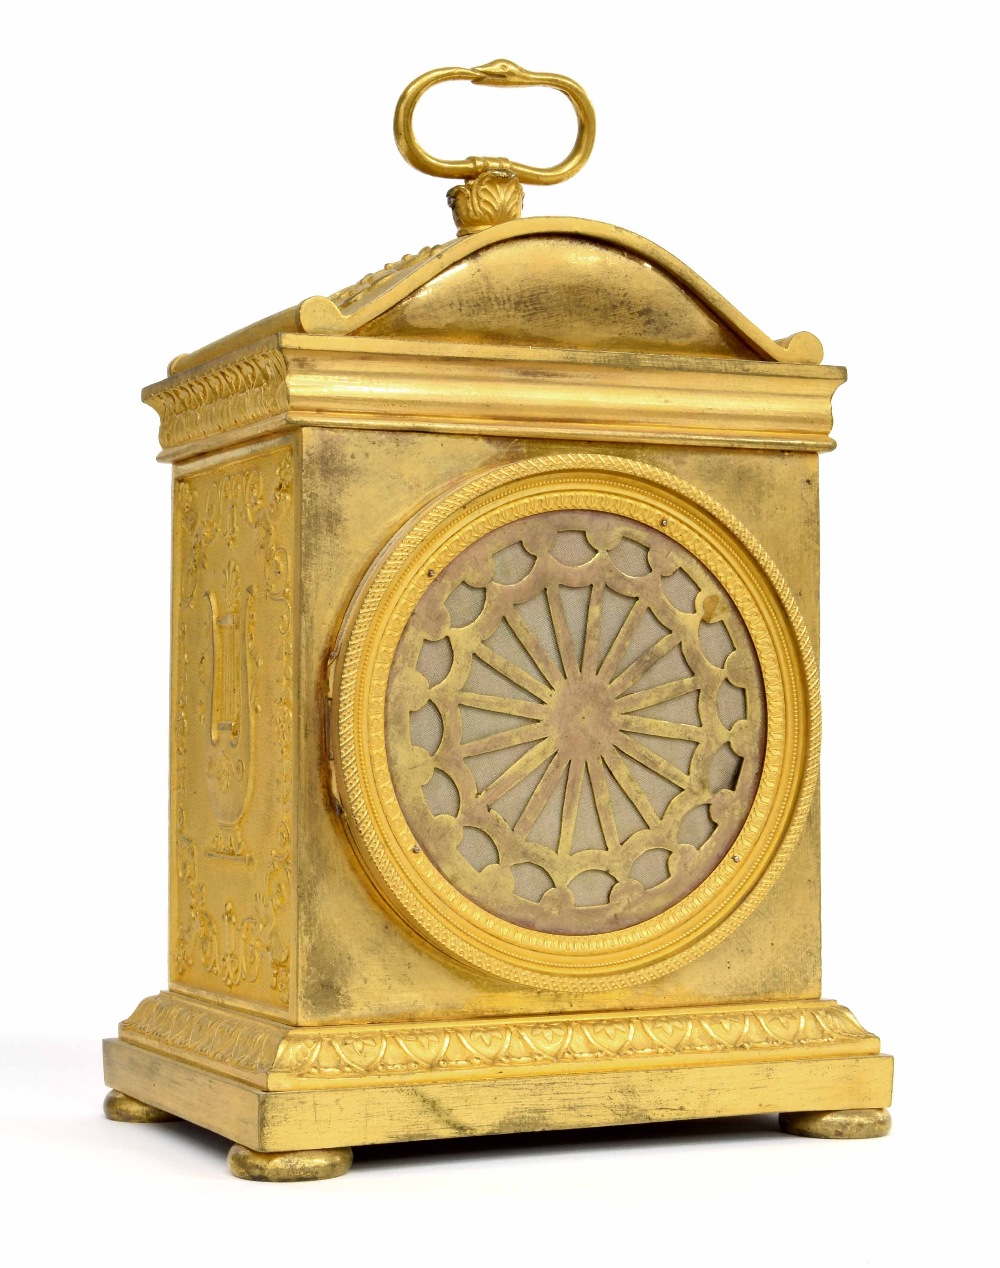 Swiss ormolu Grande Sonnerie Pendule d'Officier with alarm, no. 1571, circa 1800, the arched case - Image 2 of 4